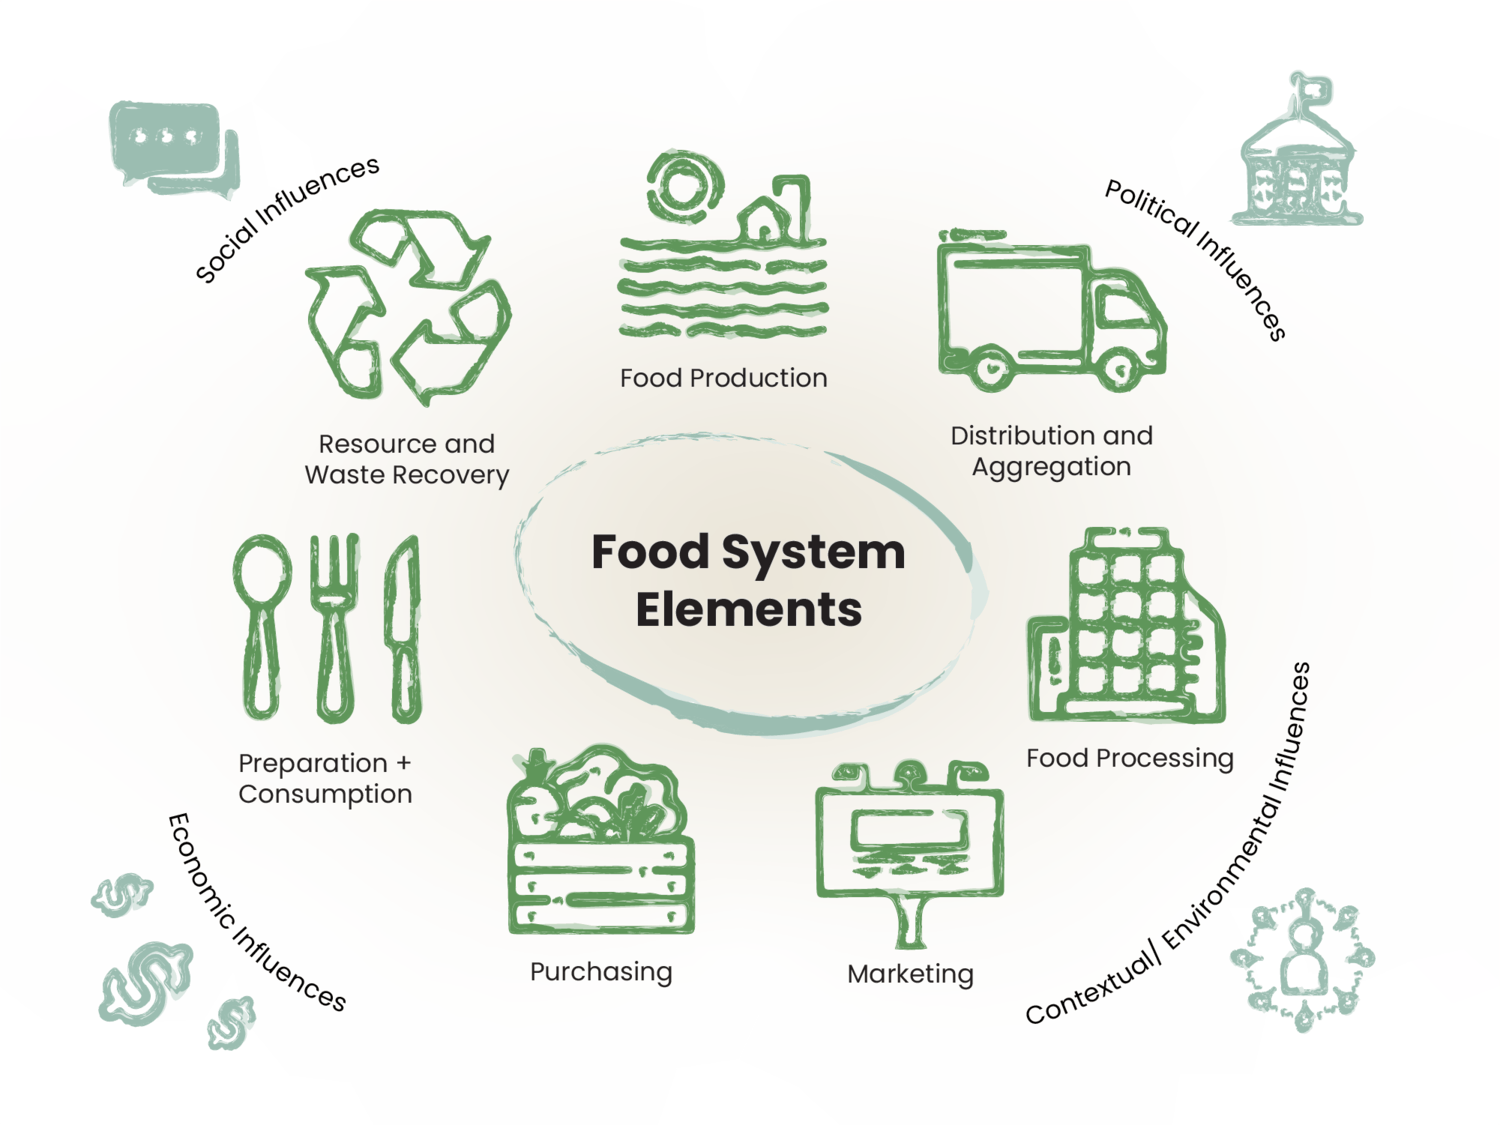 a chart that shows the elements of a food system. "Food production, distribution and aggregation, food processing, marketing, purchasing, preparation + consumption, Resource and waste recovery, Social influences, political influences, contextual/environmental influences, economic influences"